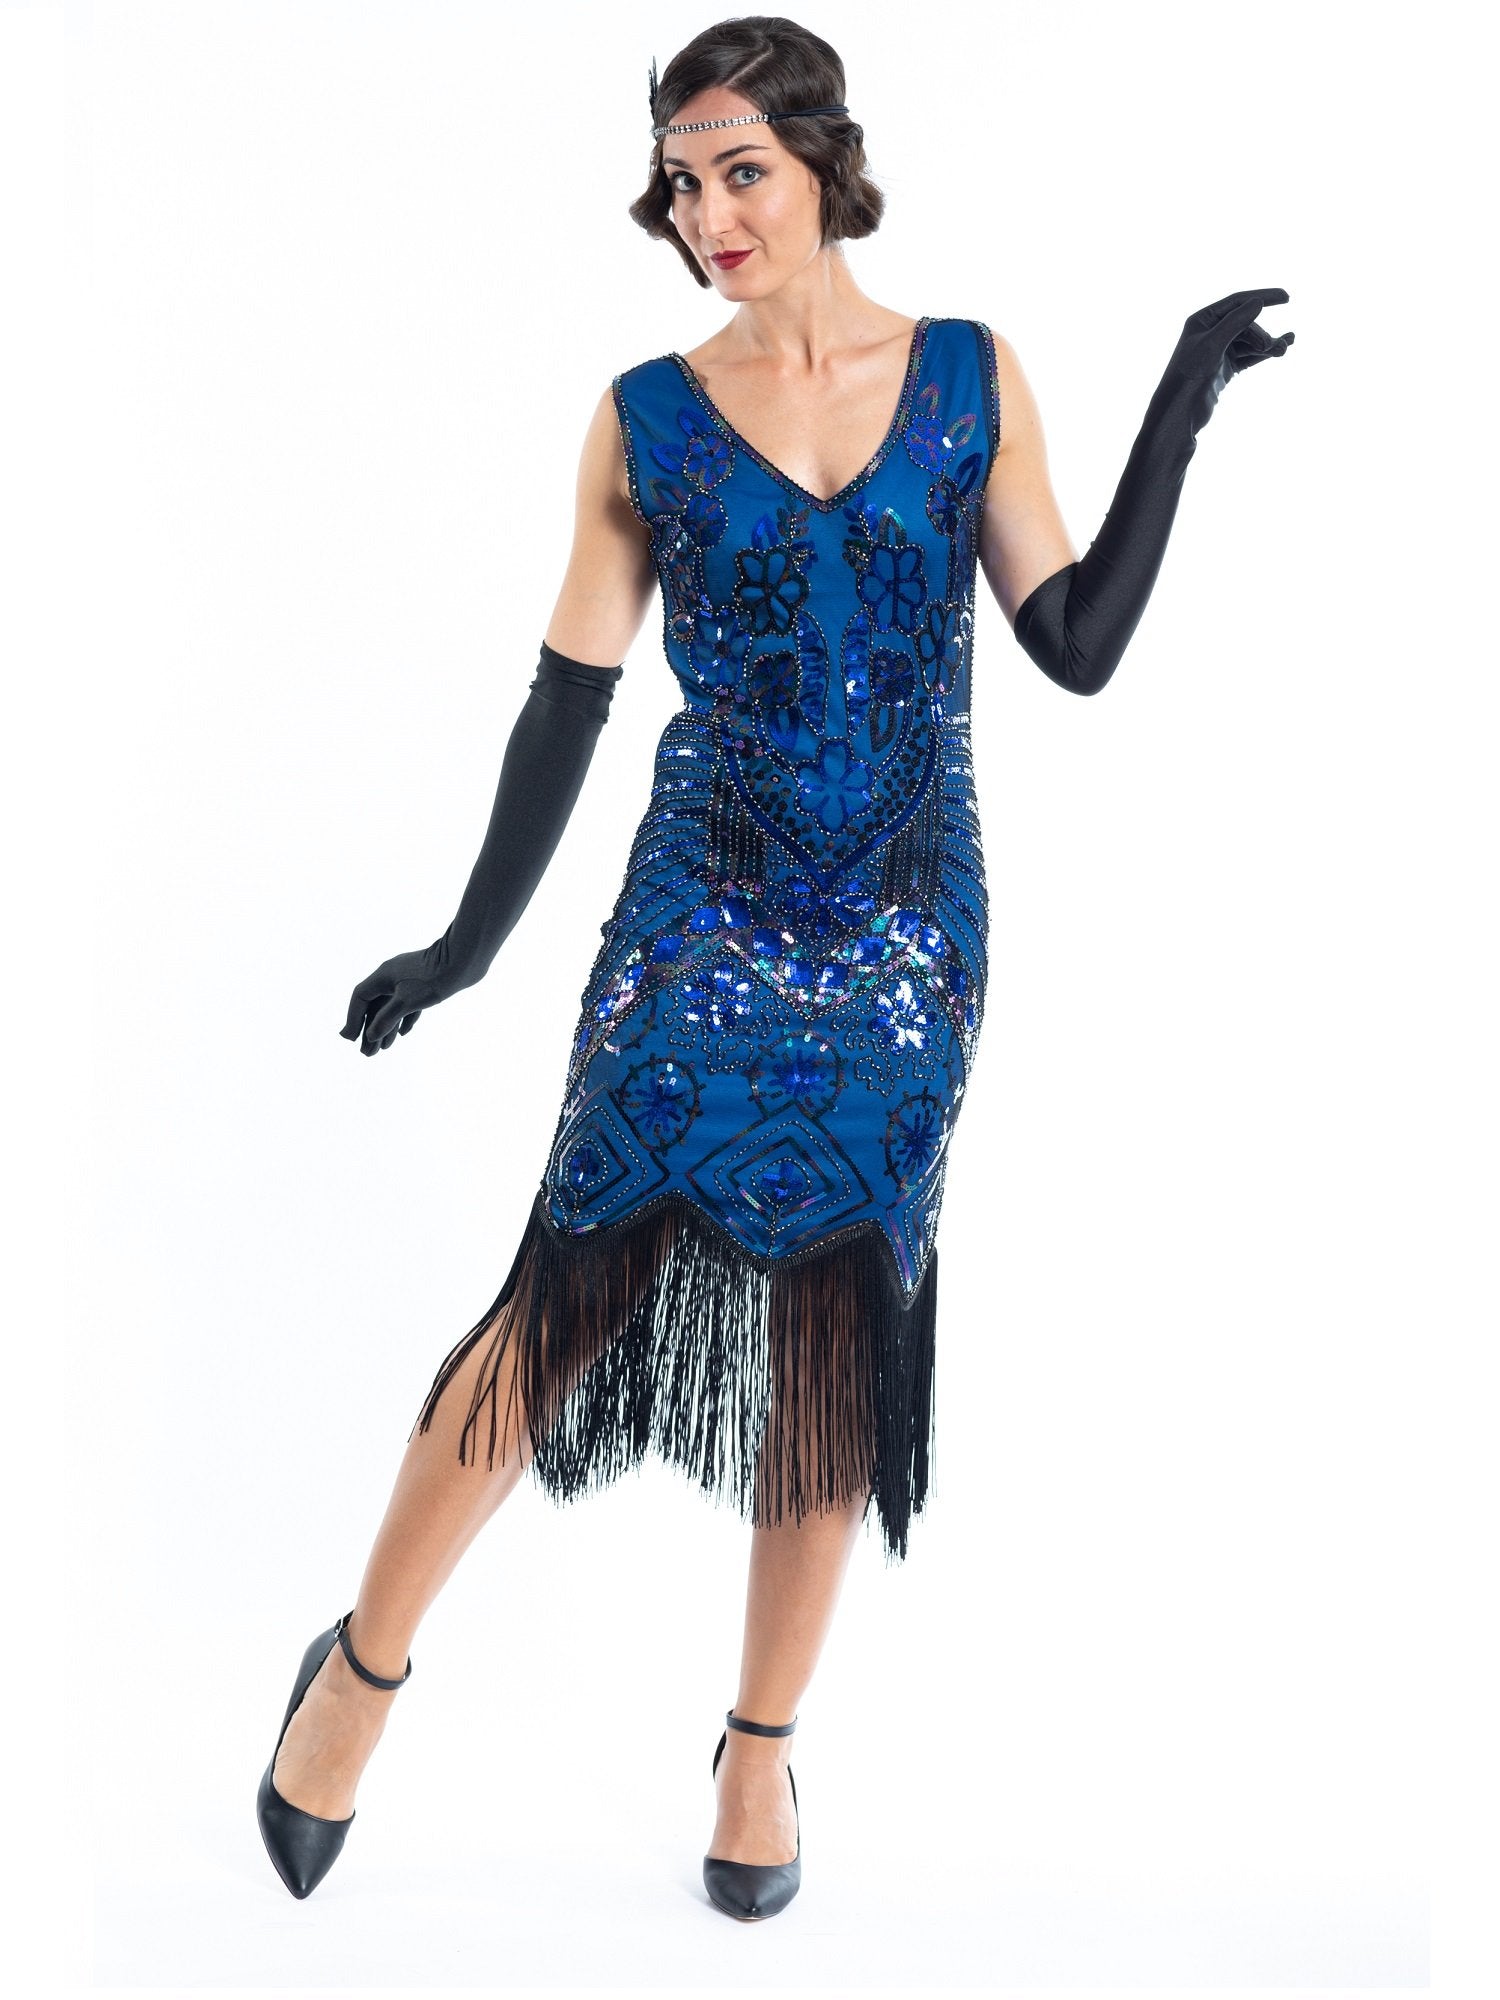 A Blue Gatsby Dress with black sequins and beads. 